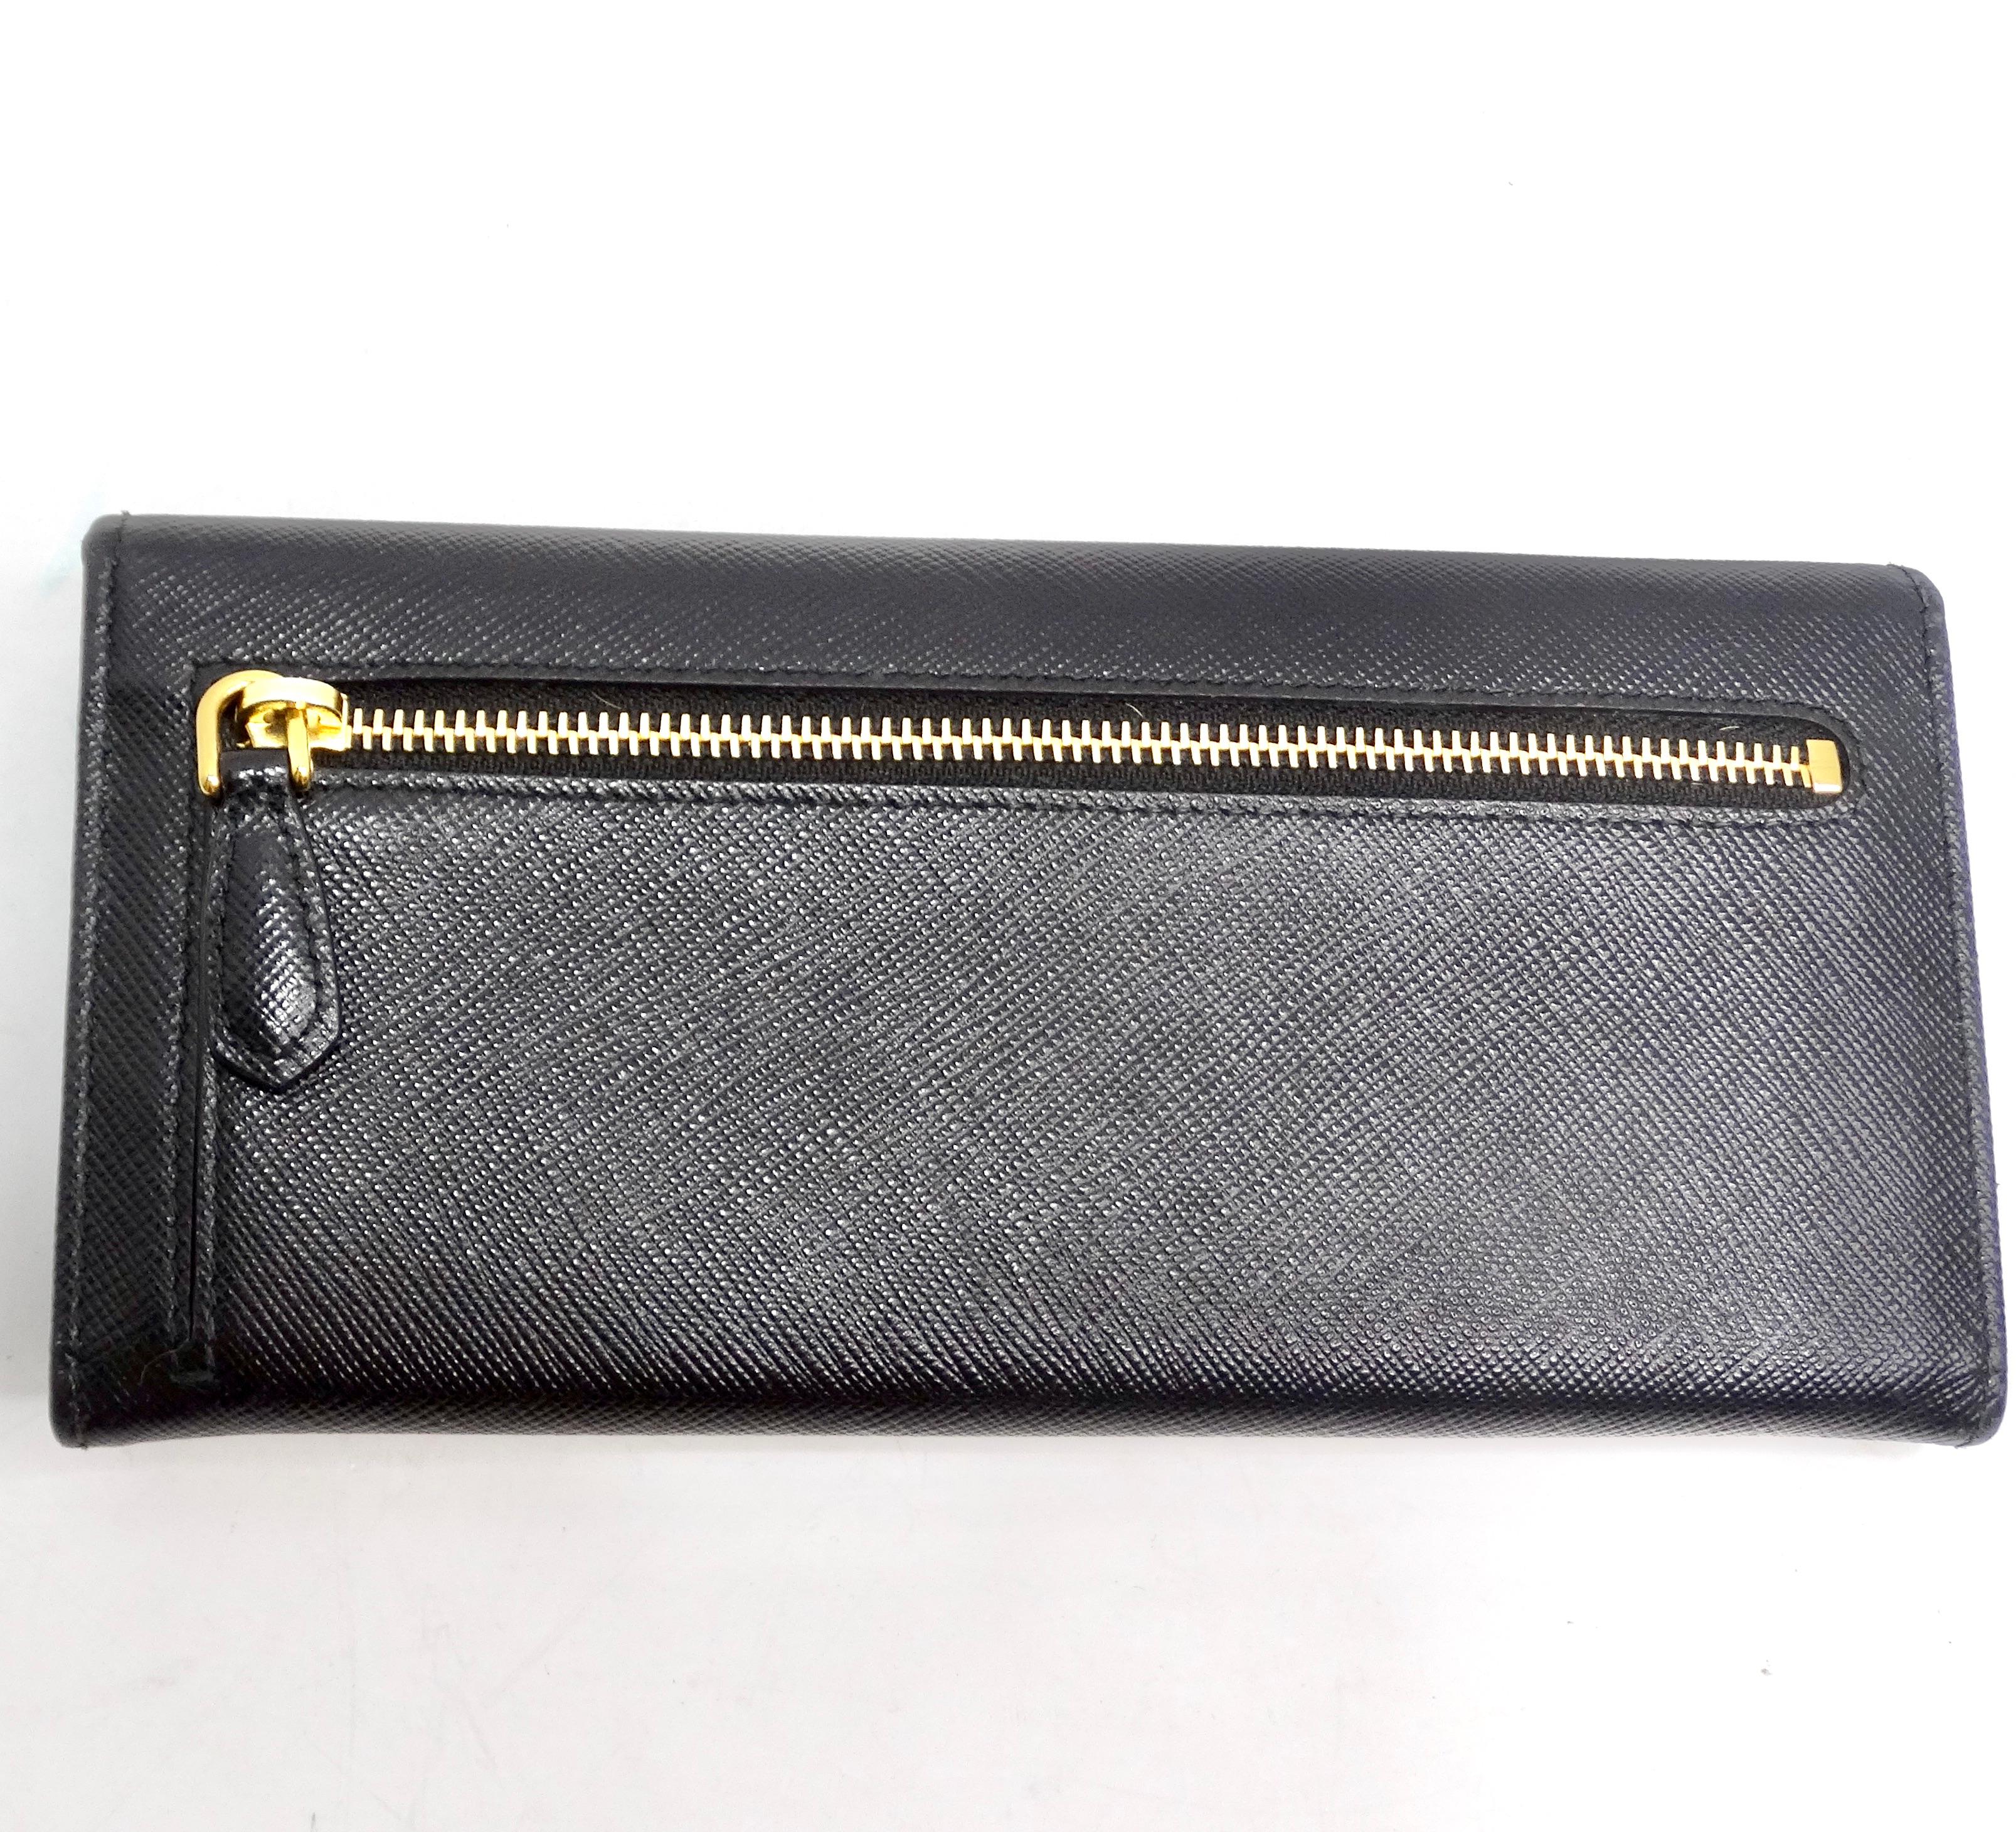 Prada Black Saffiano Leather Continental Wallet In Excellent Condition For Sale In Scottsdale, AZ